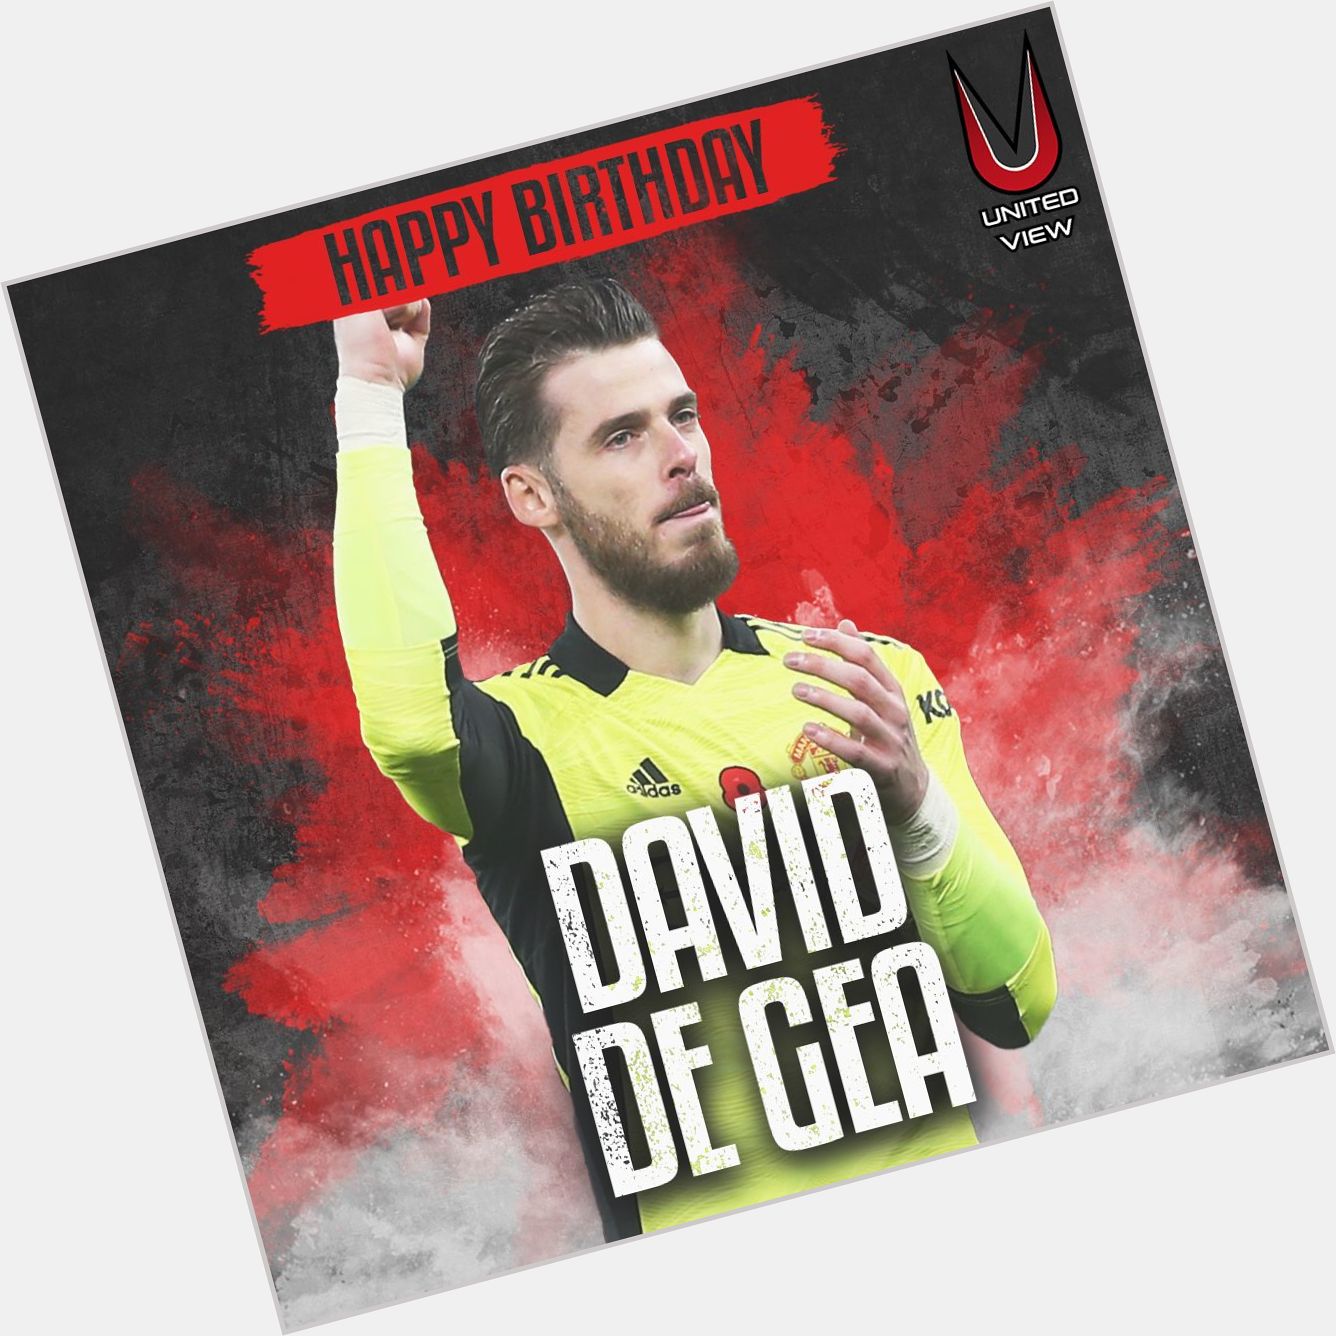 Happy birthday David De Gea!

The Manchester United goalkeeper turns 31 years old today.  